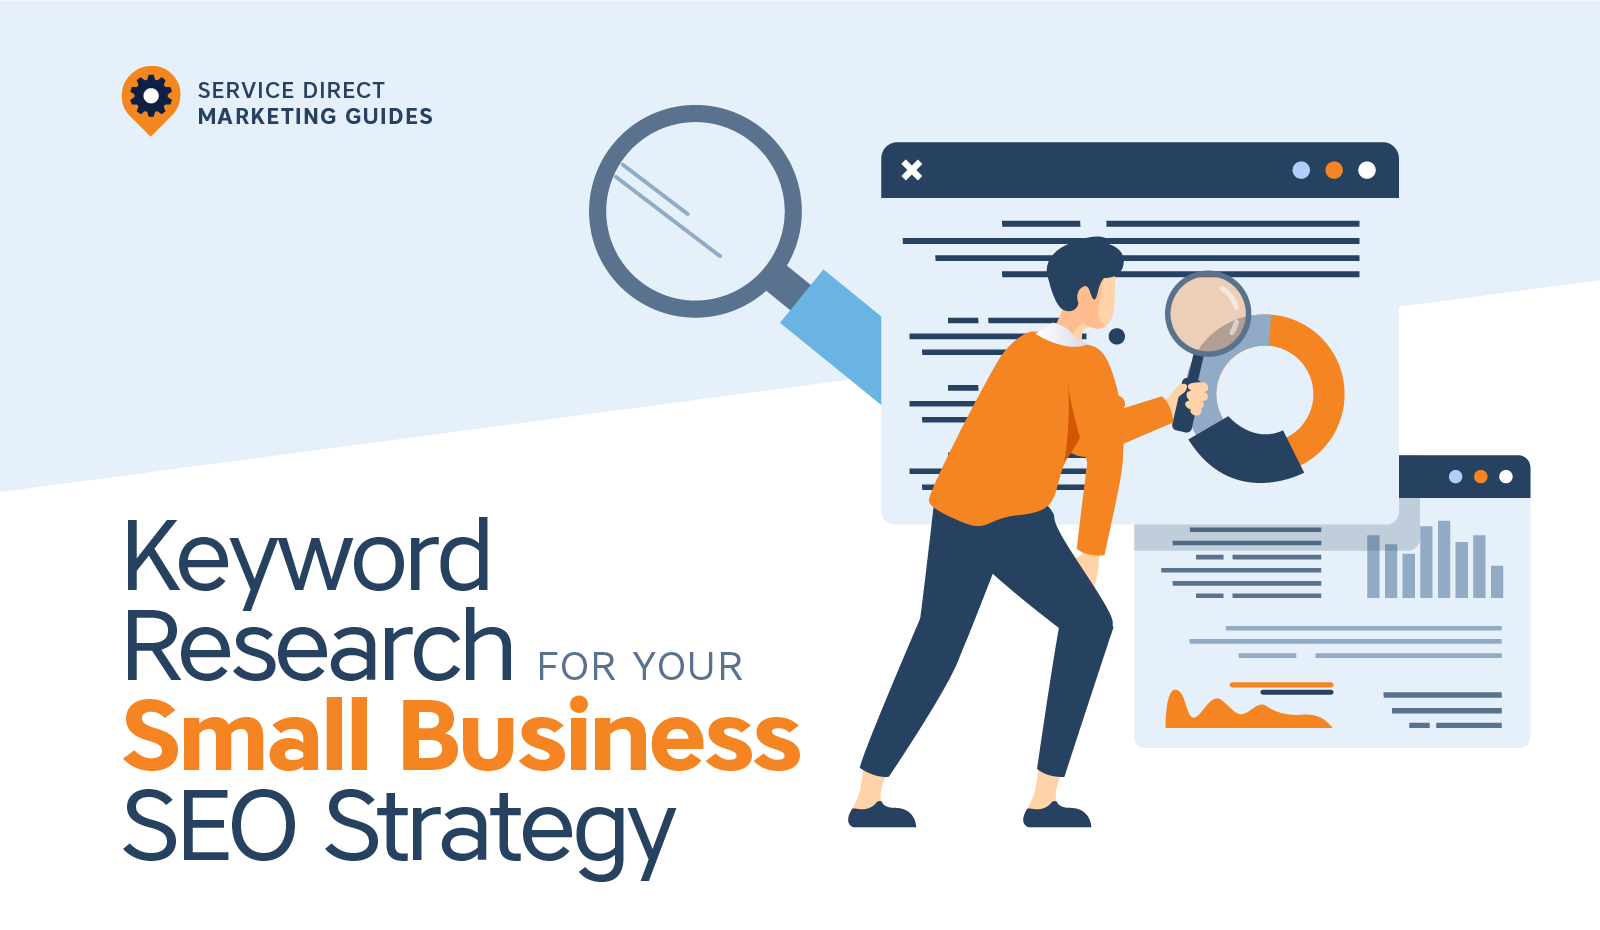 How to do Keyword Research For Your Small Business SEO Strategy